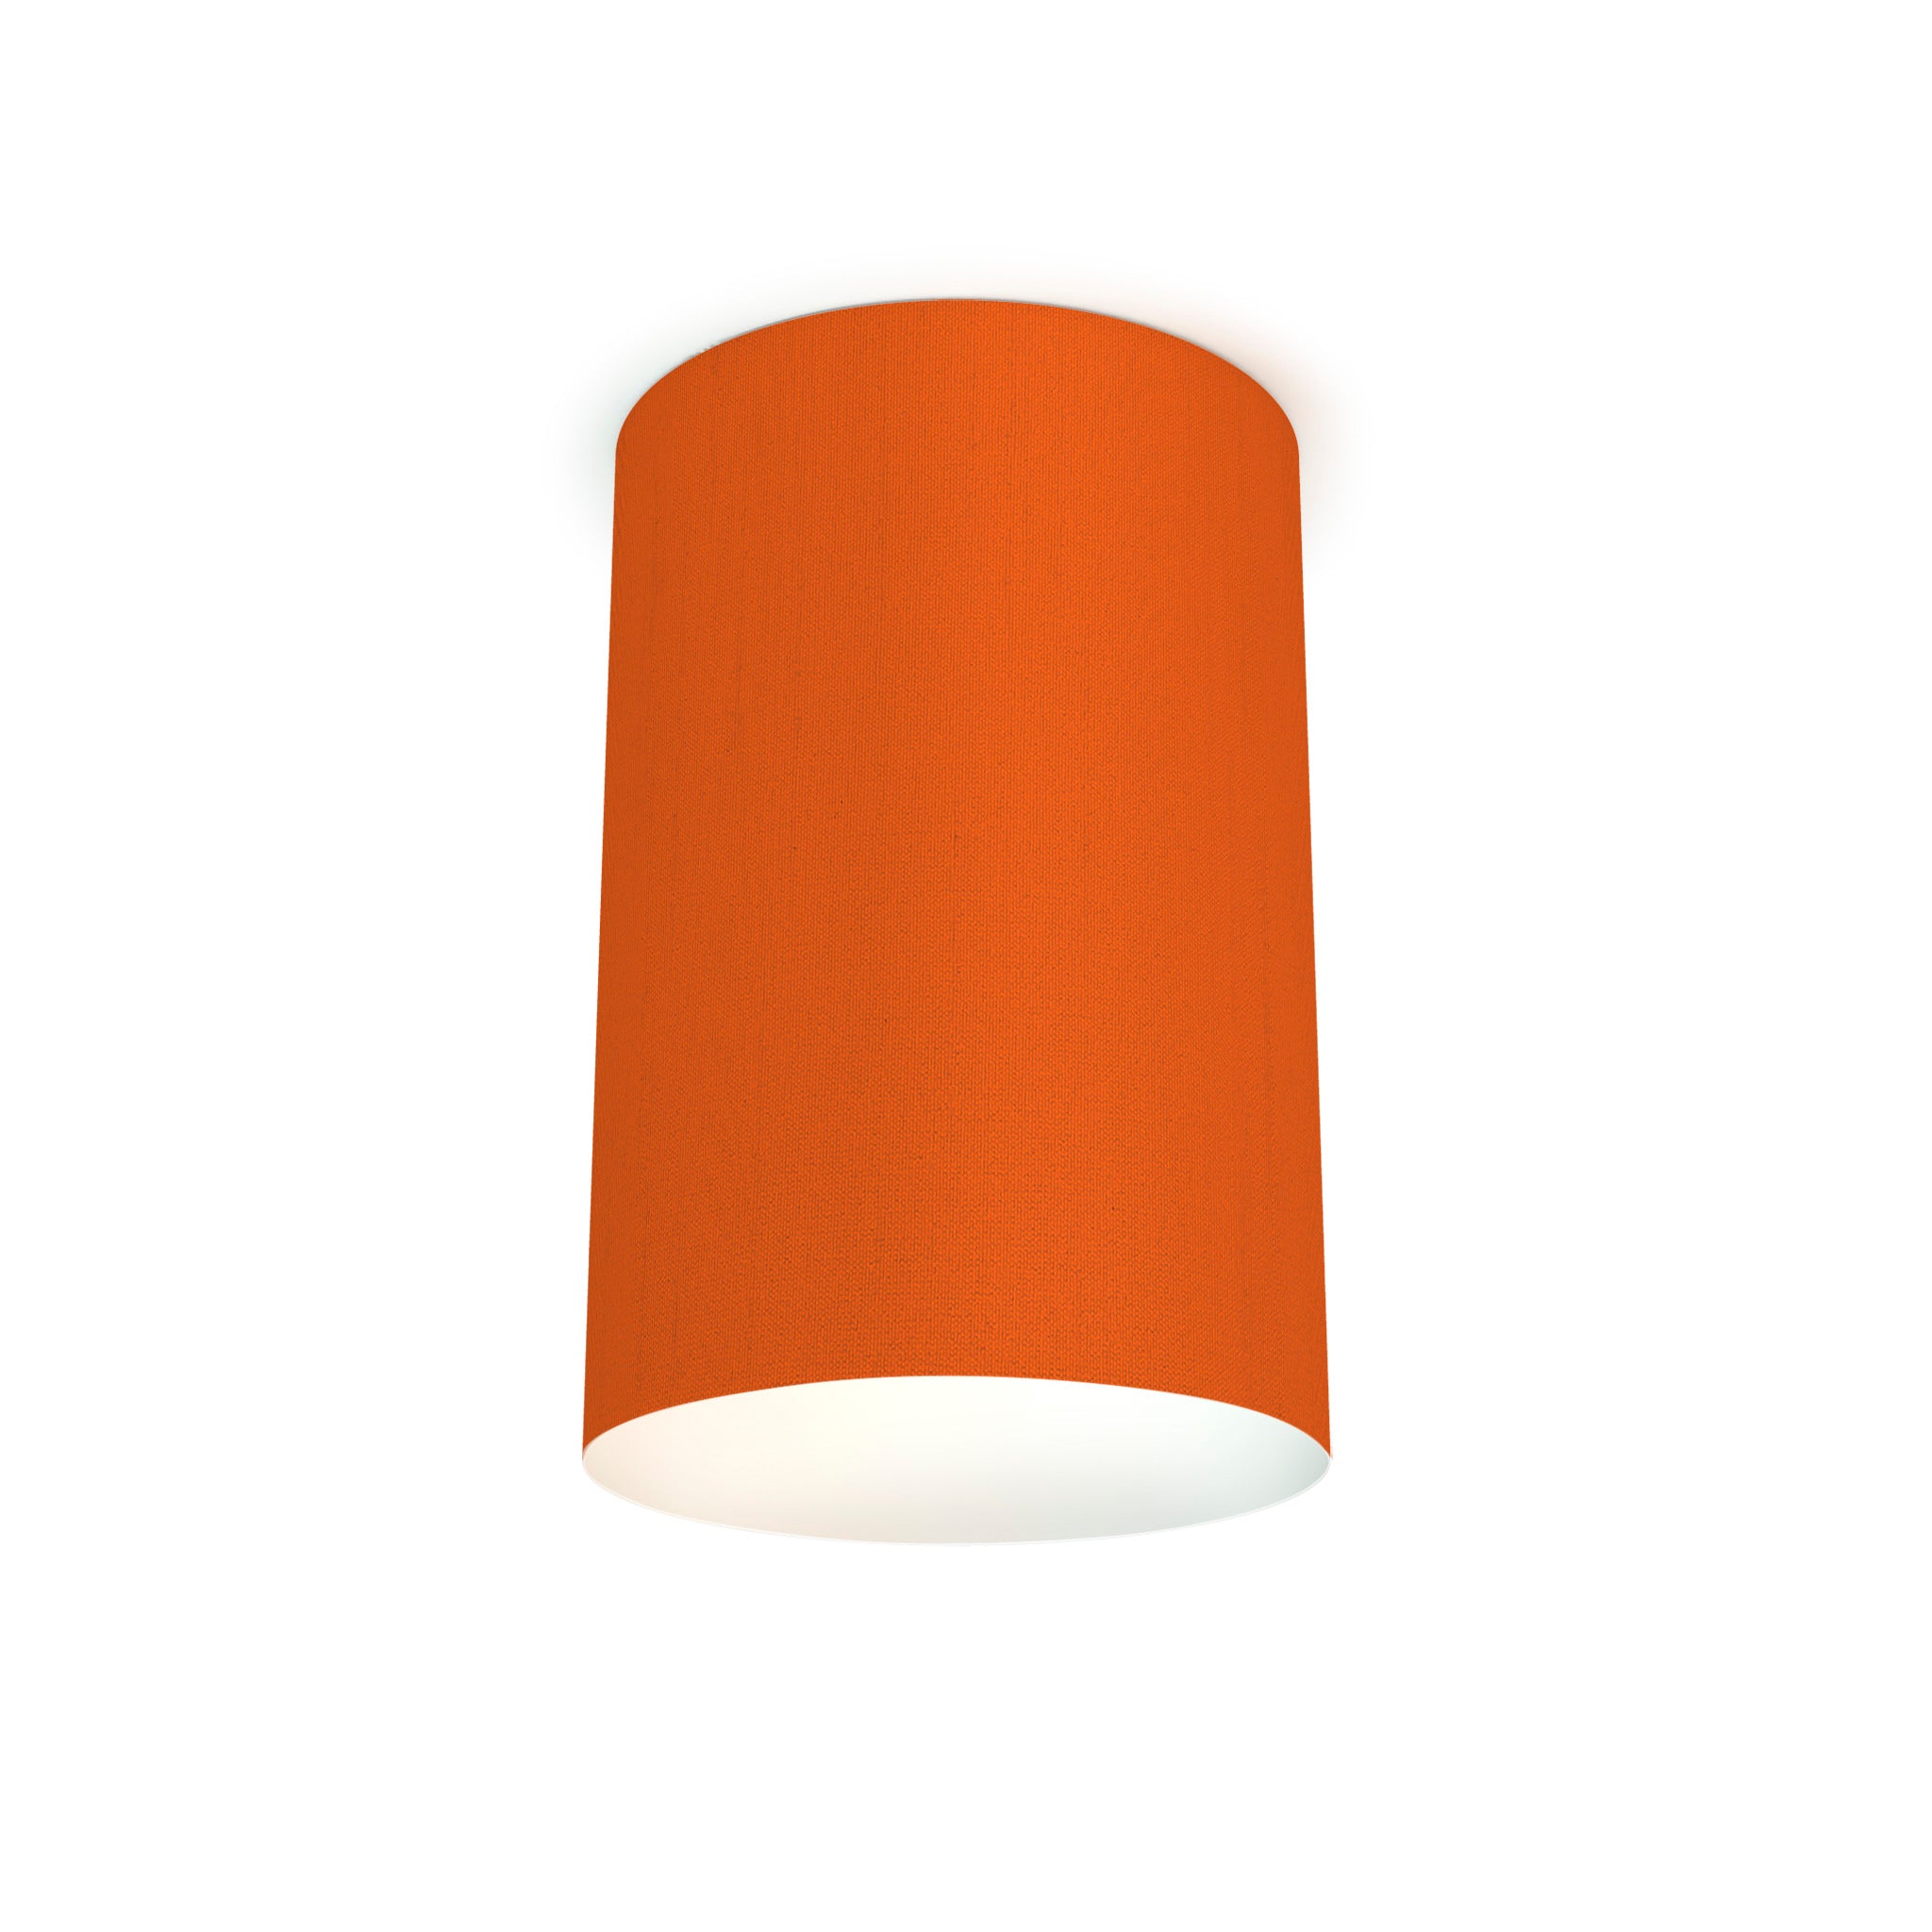 The Lily Flush Mount from Seascape Fixtures in silk, orange color.